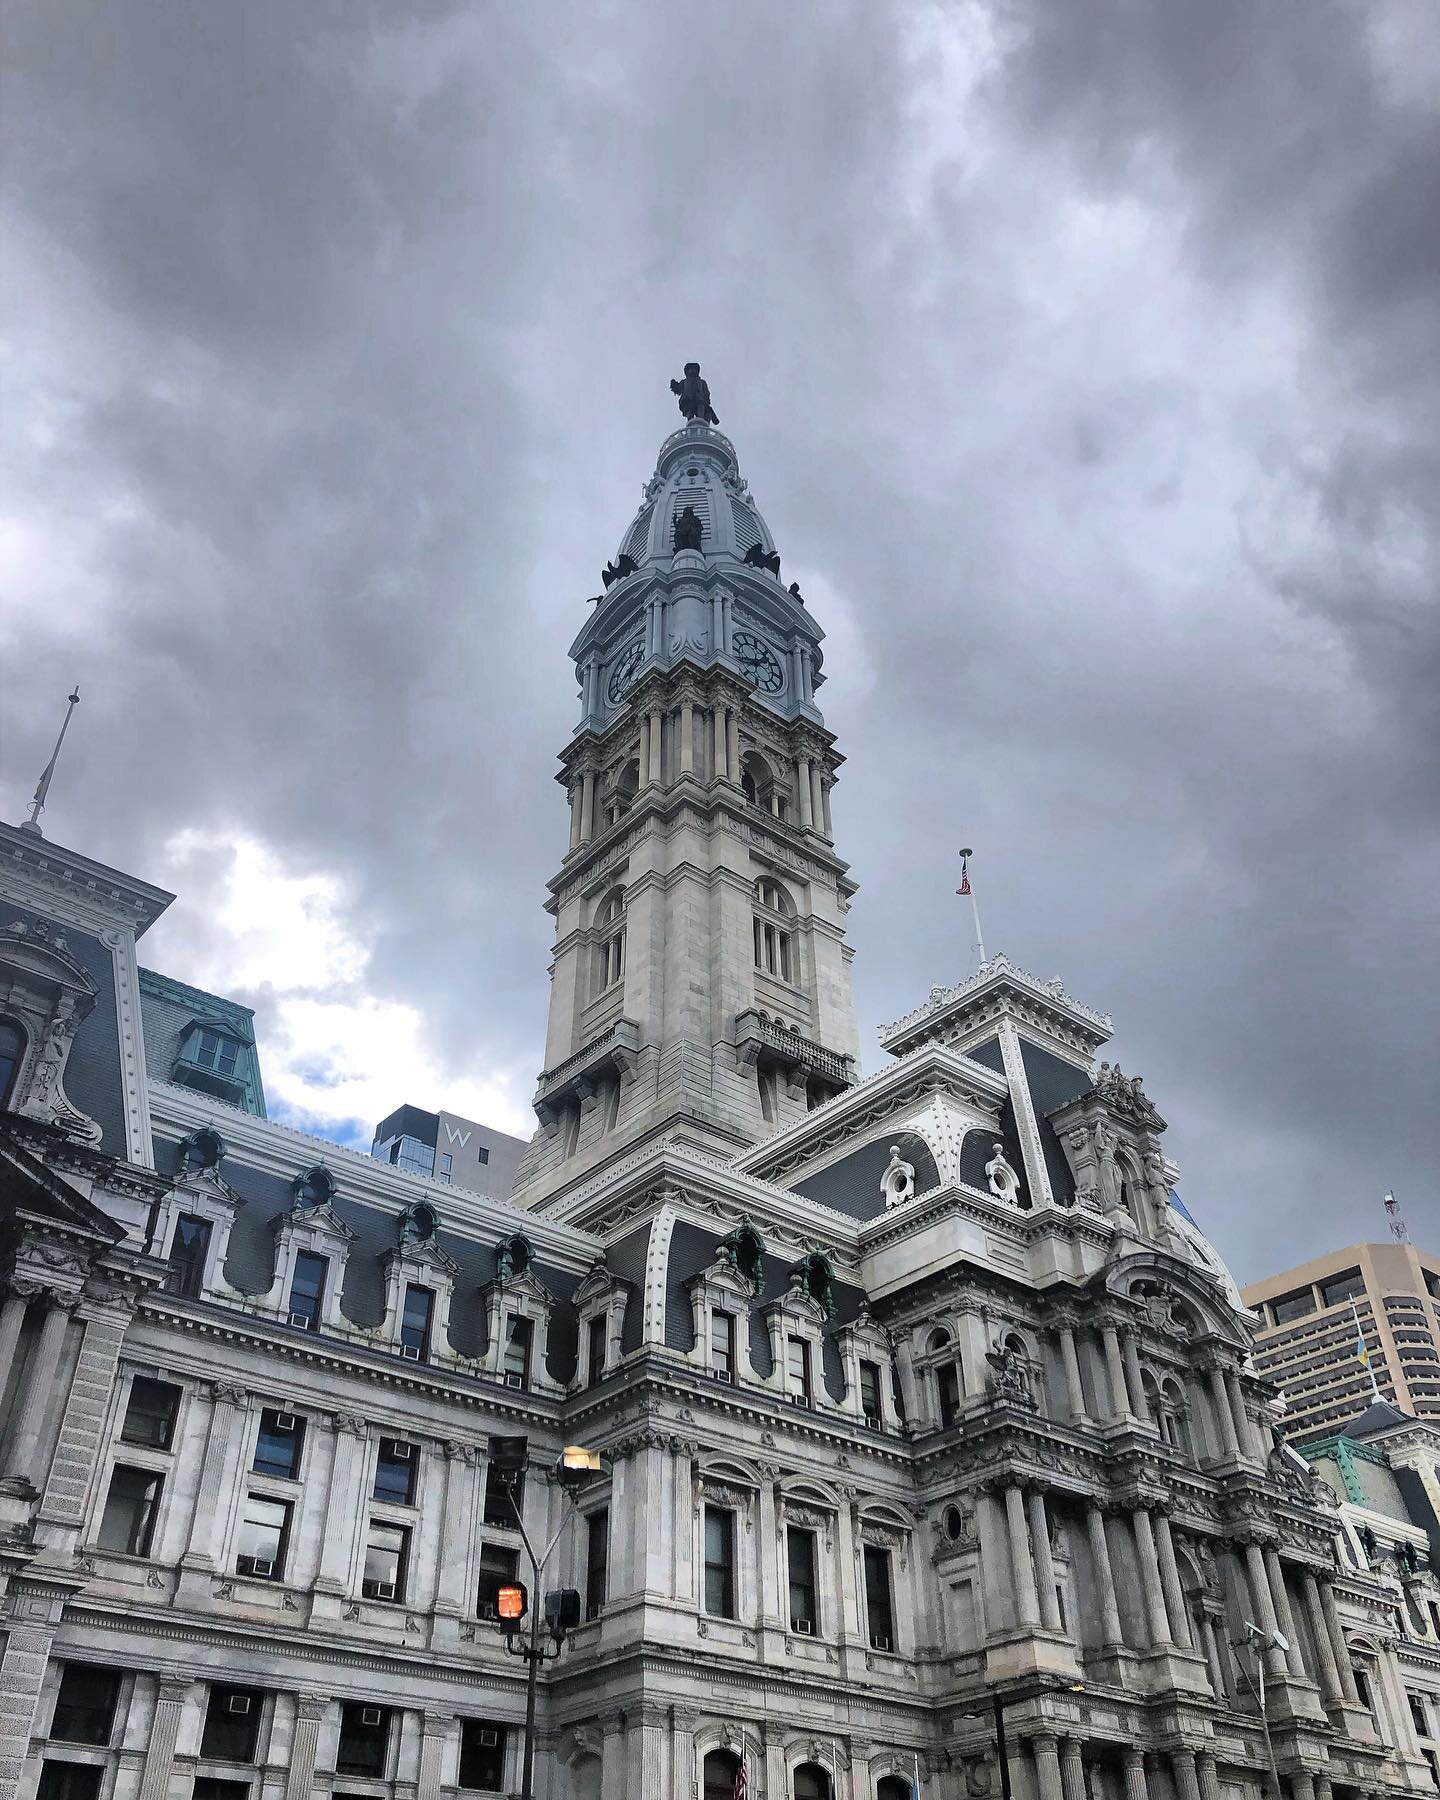 Travelogue: I took a little break last weekend to relax and enjoy the sights in Philadelphia. (And, of course, the food, too.) @potterybychrissy and I had a dazzling experience and explored the city!

[Image: a clock tower greets grey skies in downto